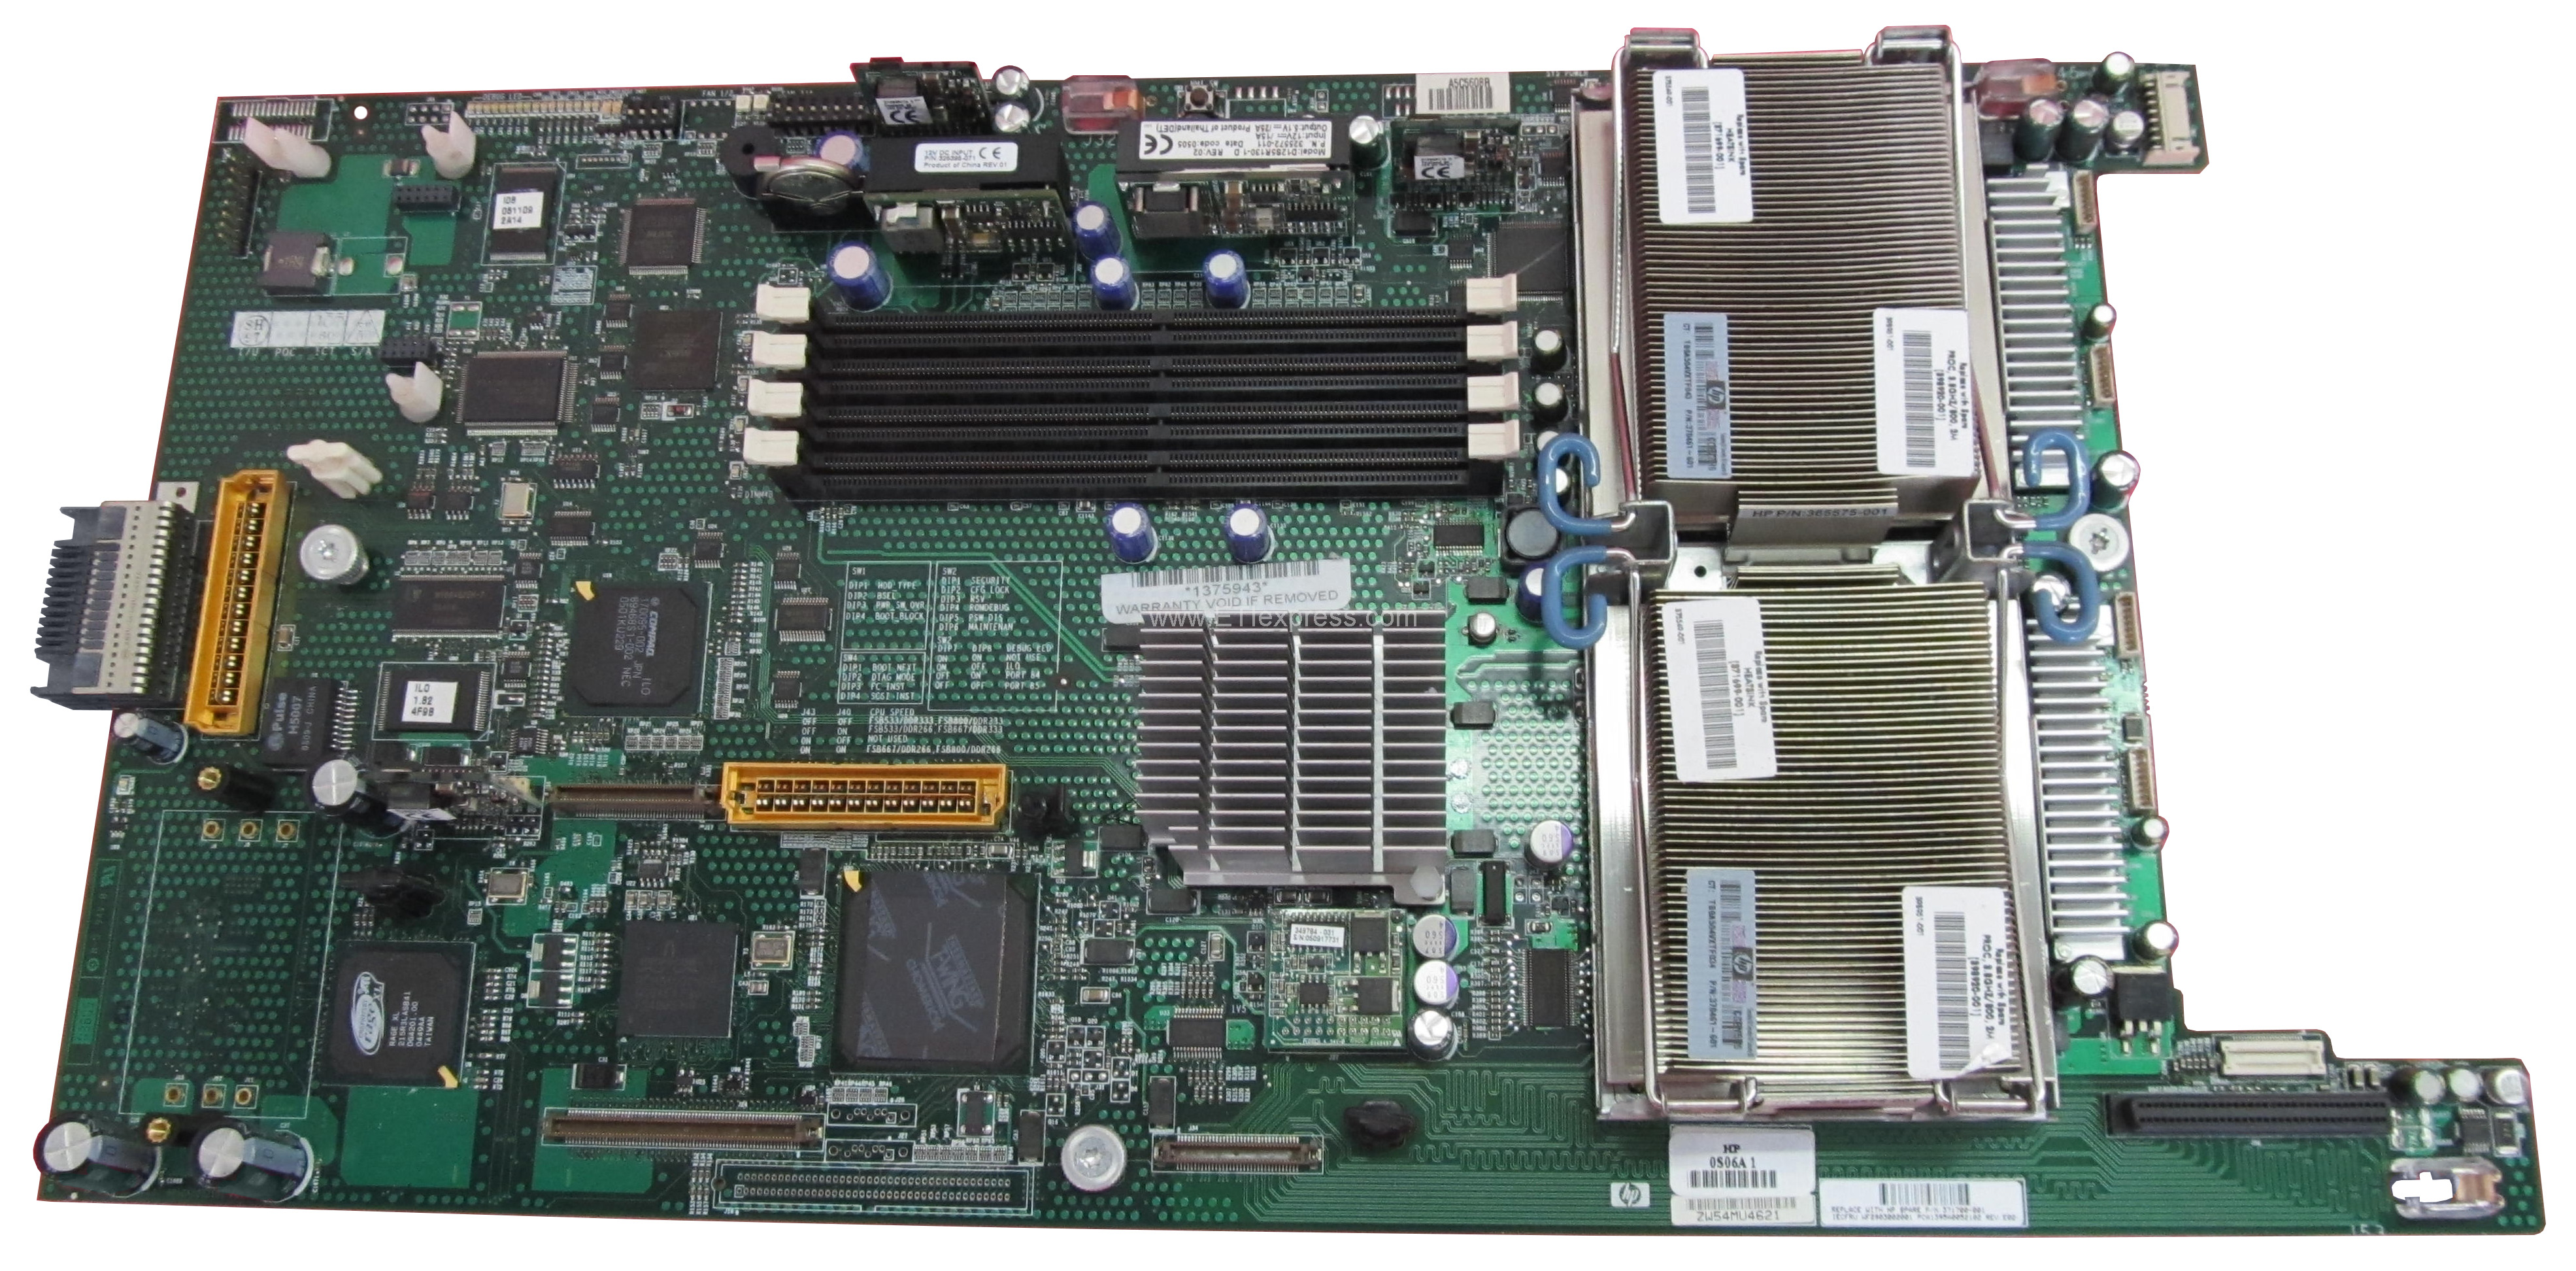 371700-001 | HP System Board (Motherboard) for HP ProLiant BL20p G3 Server